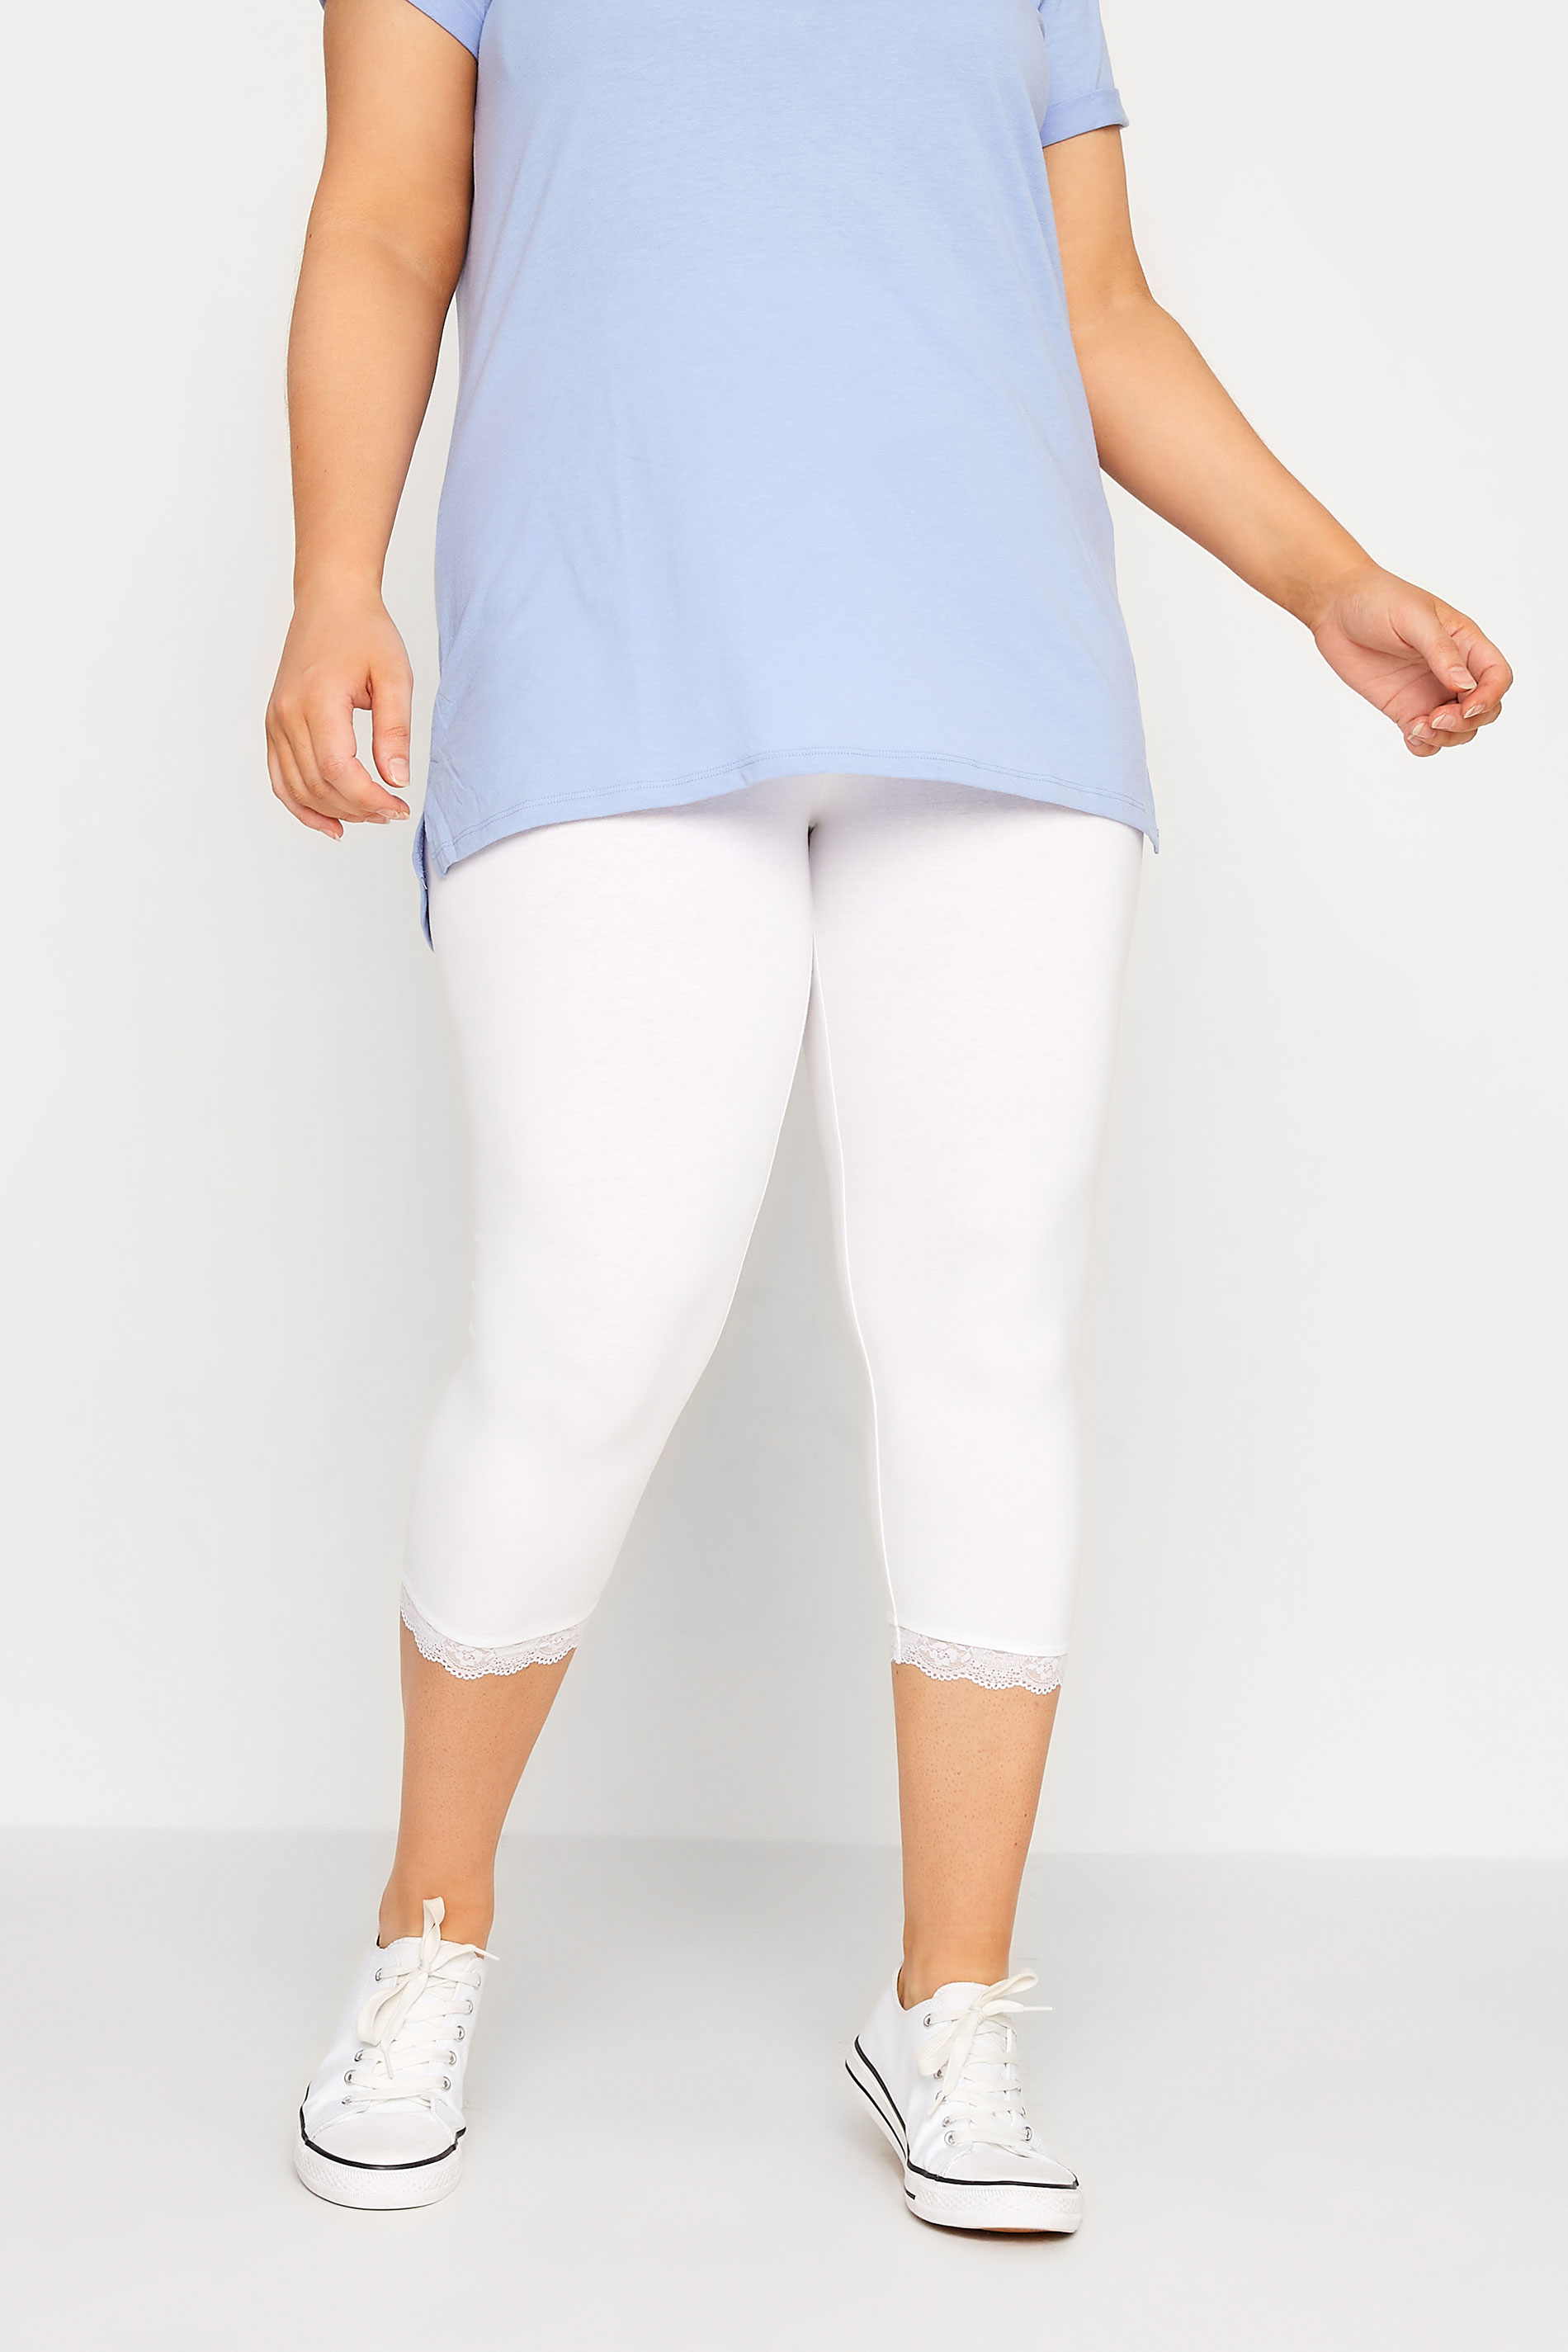 YOURS FOR GOOD Plus Size White Cotton Lace Trim Crop Leggings | Yours Clothing 2